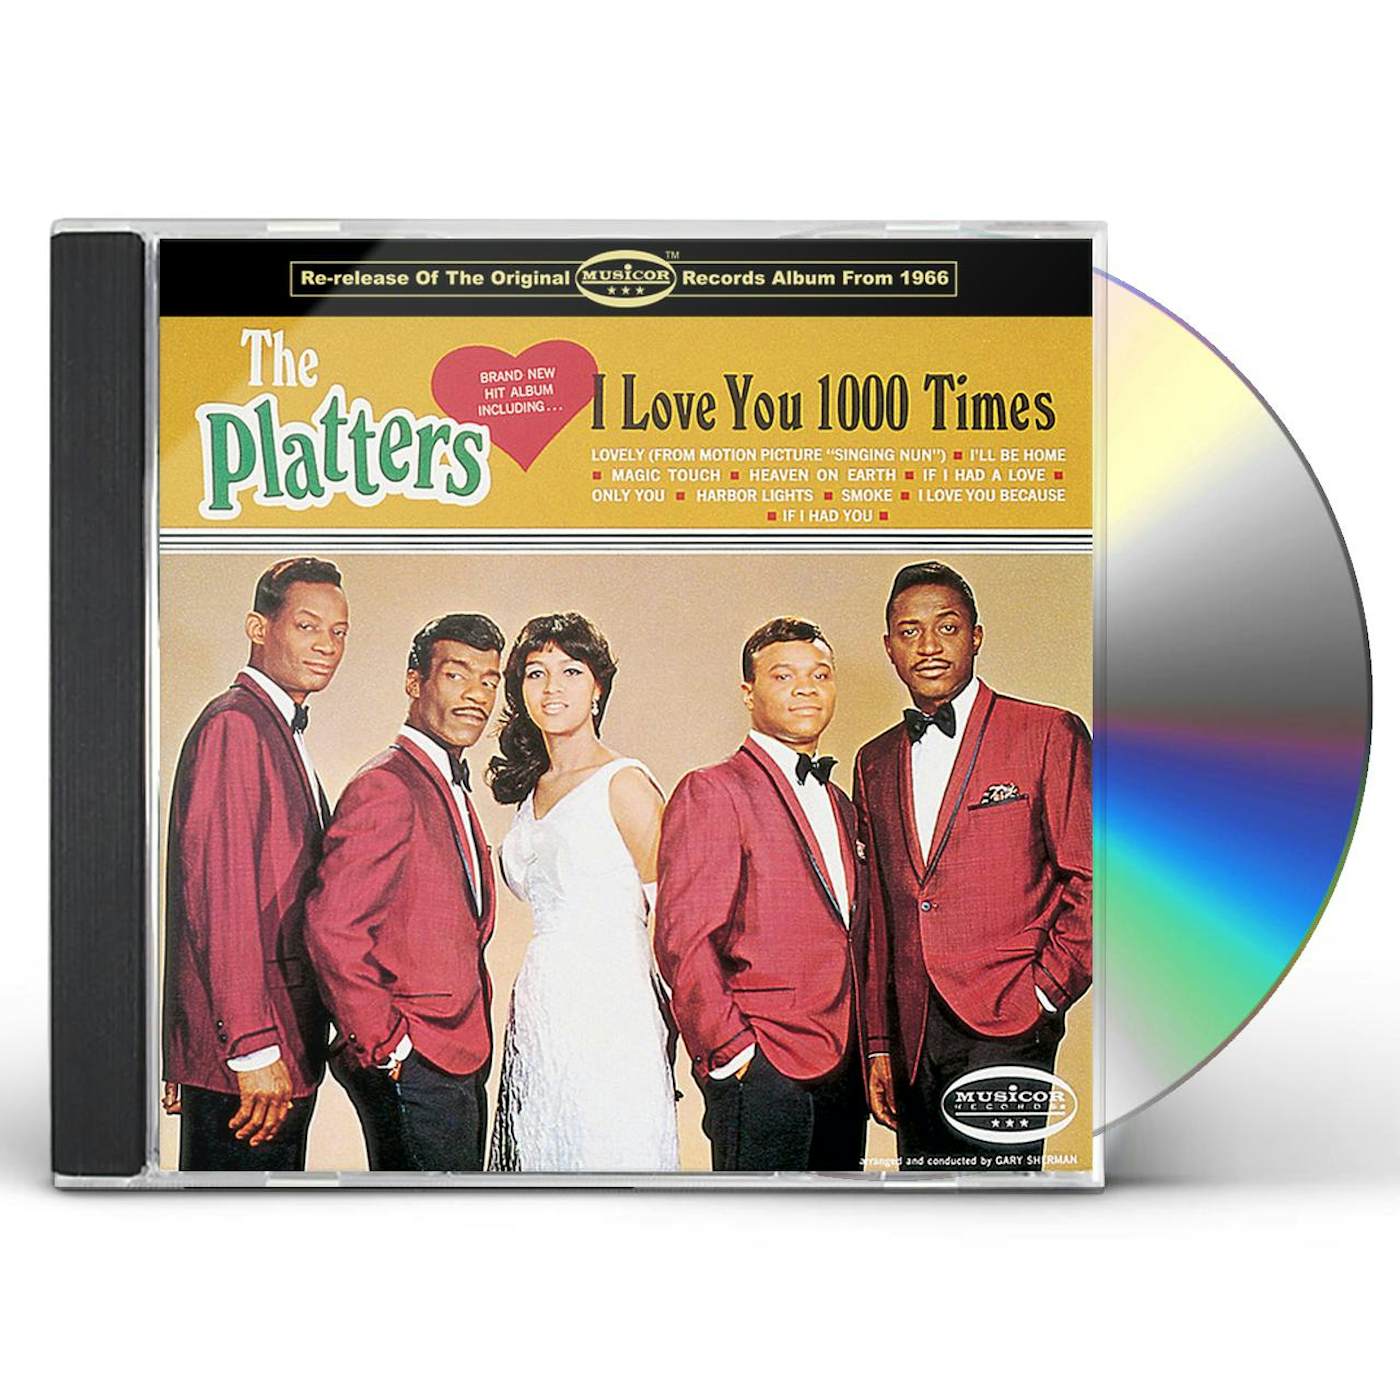 The Platters I LOVE YOU 1000 TIMES CD